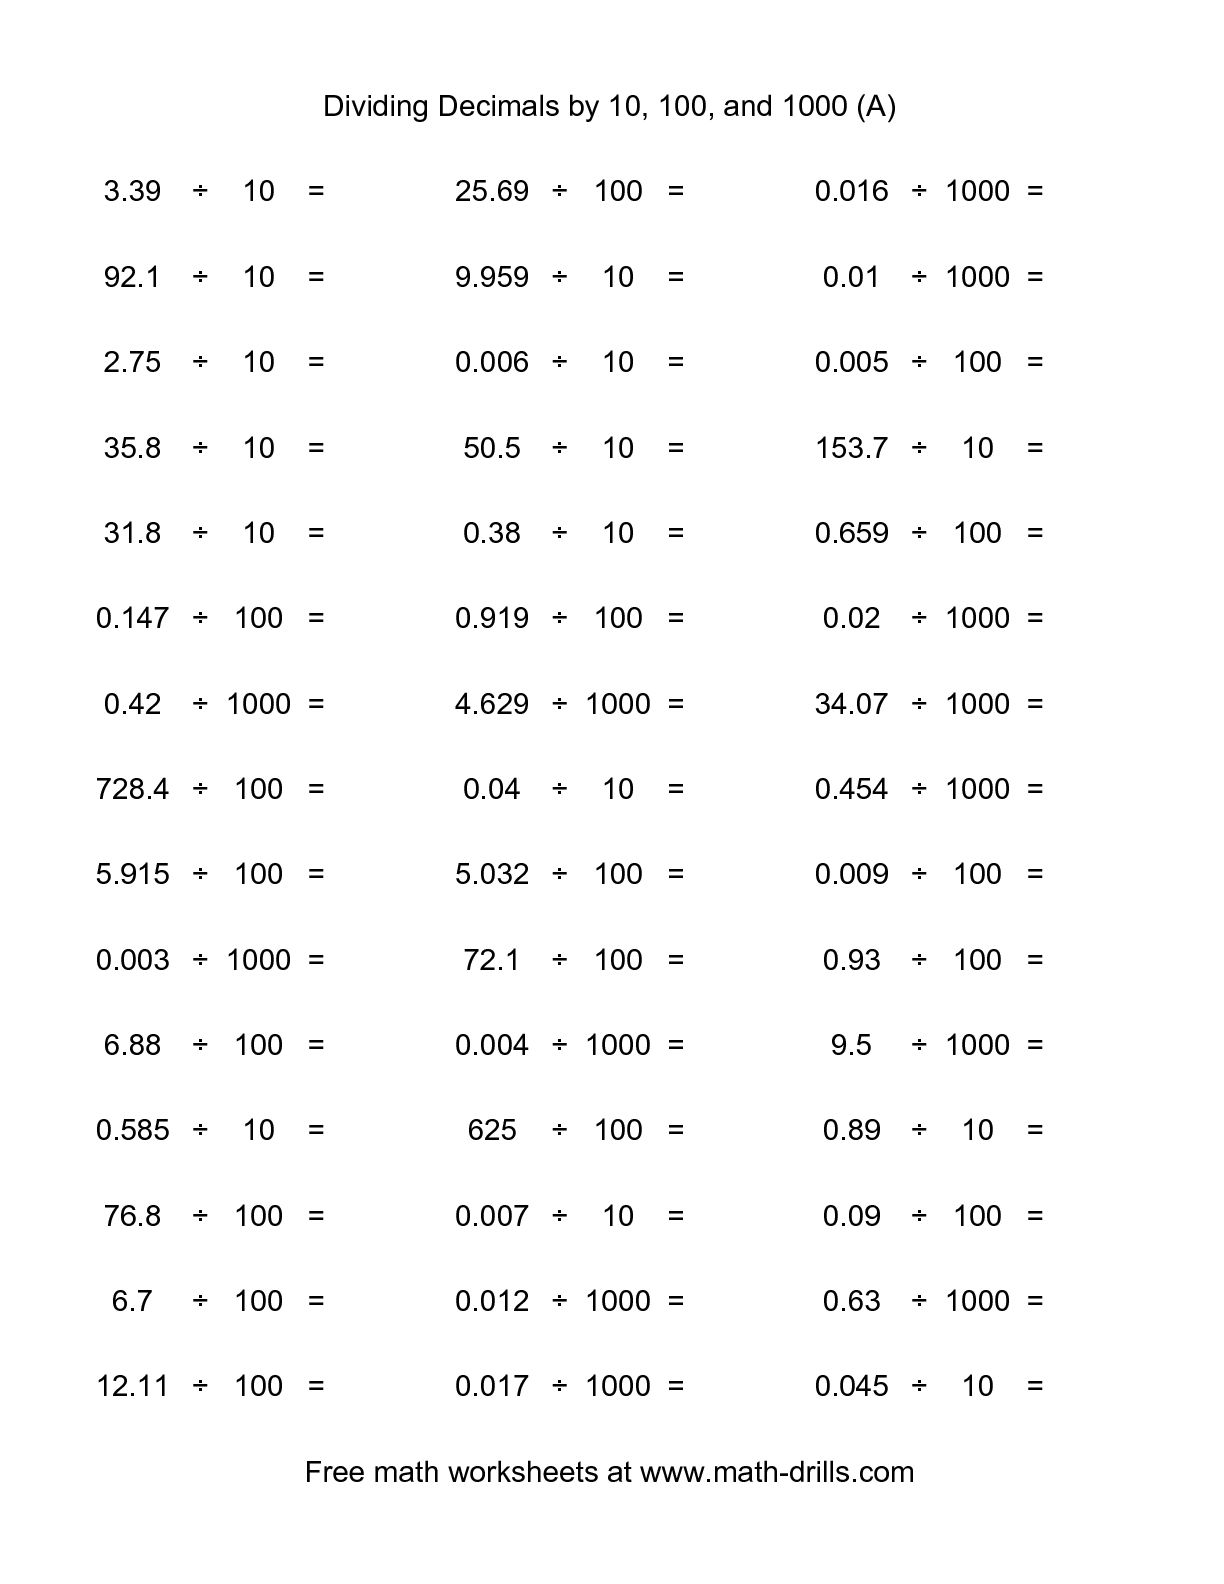 decimal-division-by-10-100-and-1000-worksheet